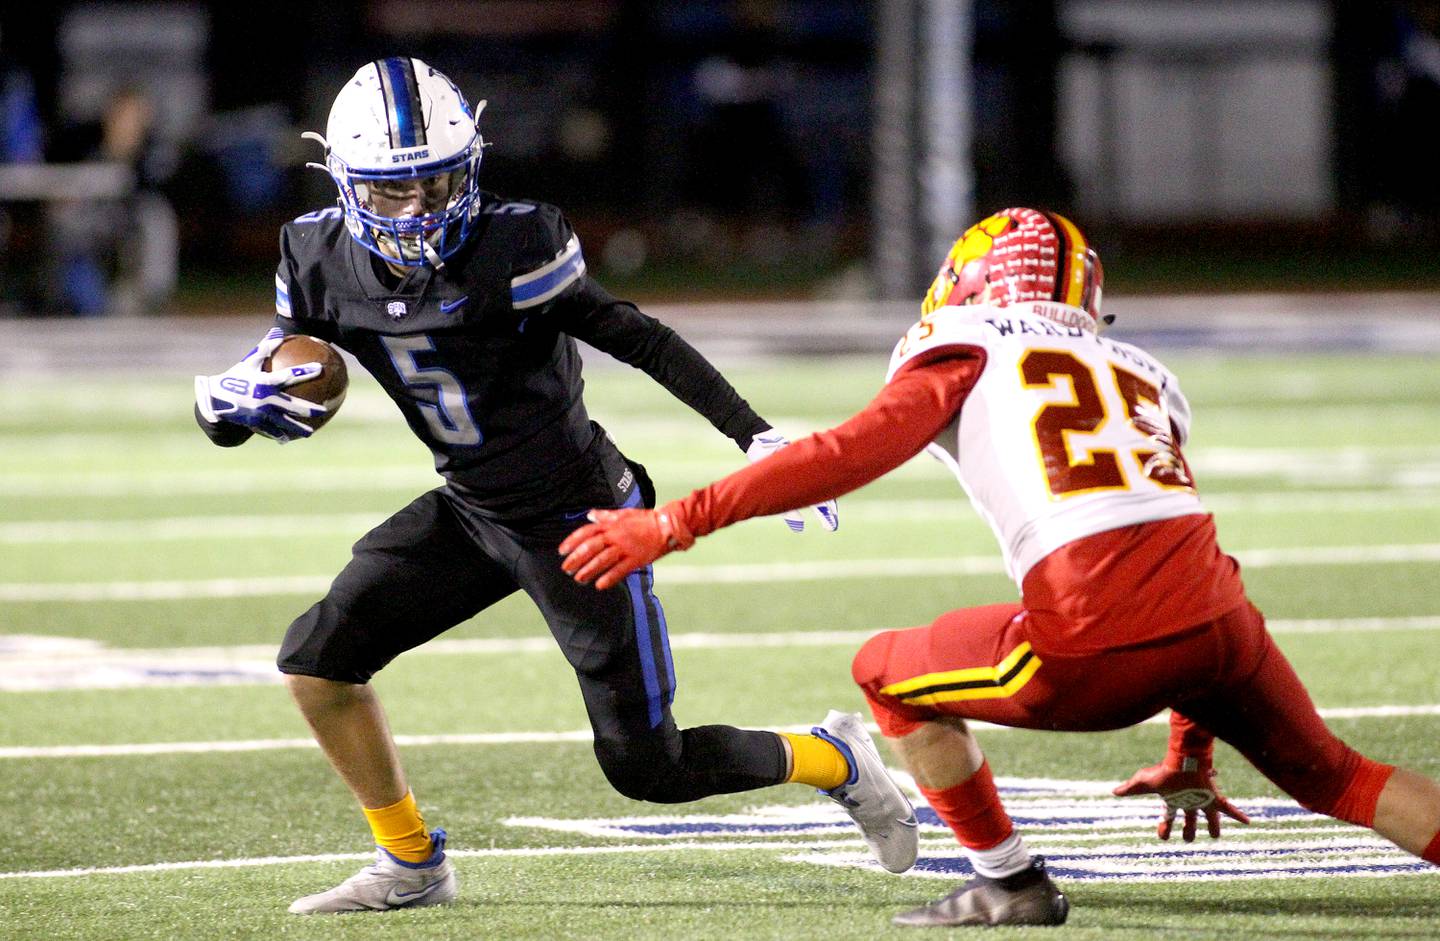 St. Charles North's Anthony Taormina (5) is stopped by Batavia's Grant Wardynski during a game at St. Charles North on Friday, Oct. 22, 2021.